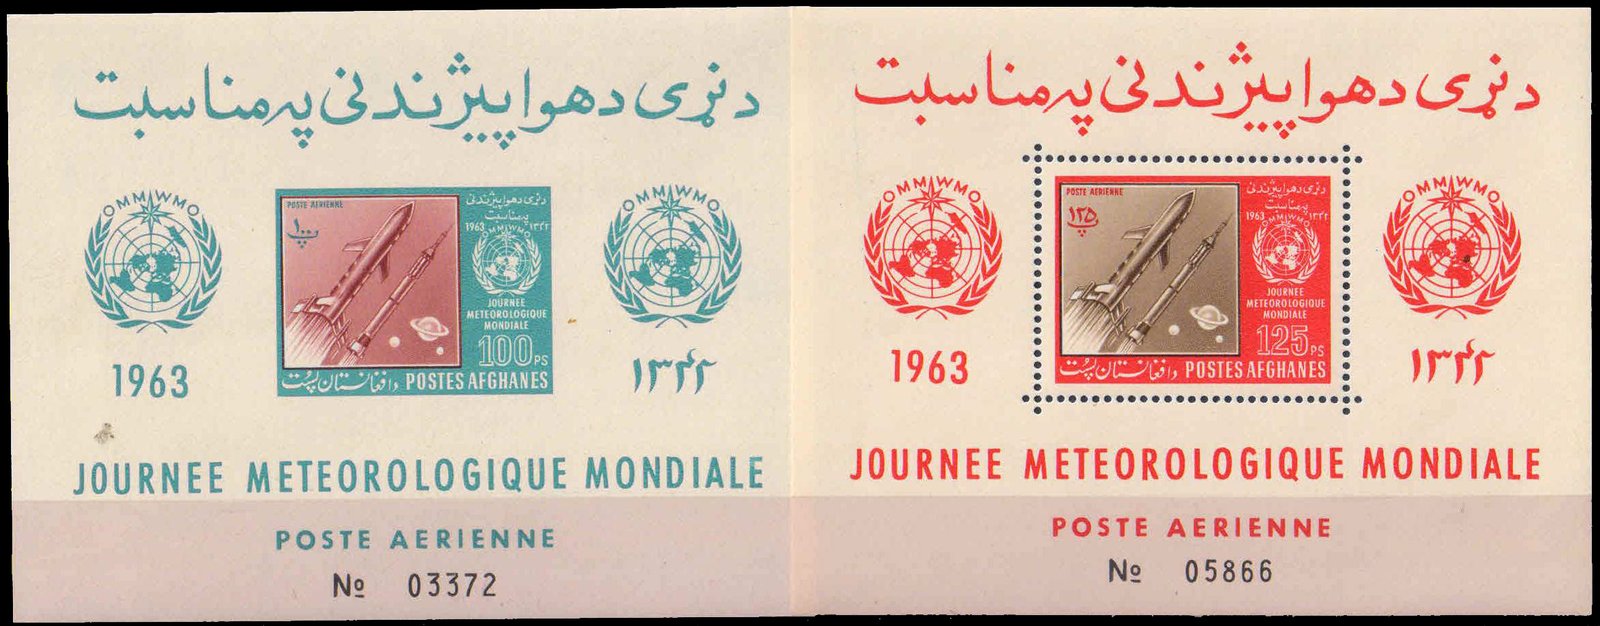 AFGHANISTAN 1963, Meteorological Space, Set of 2 Sheets, MNH